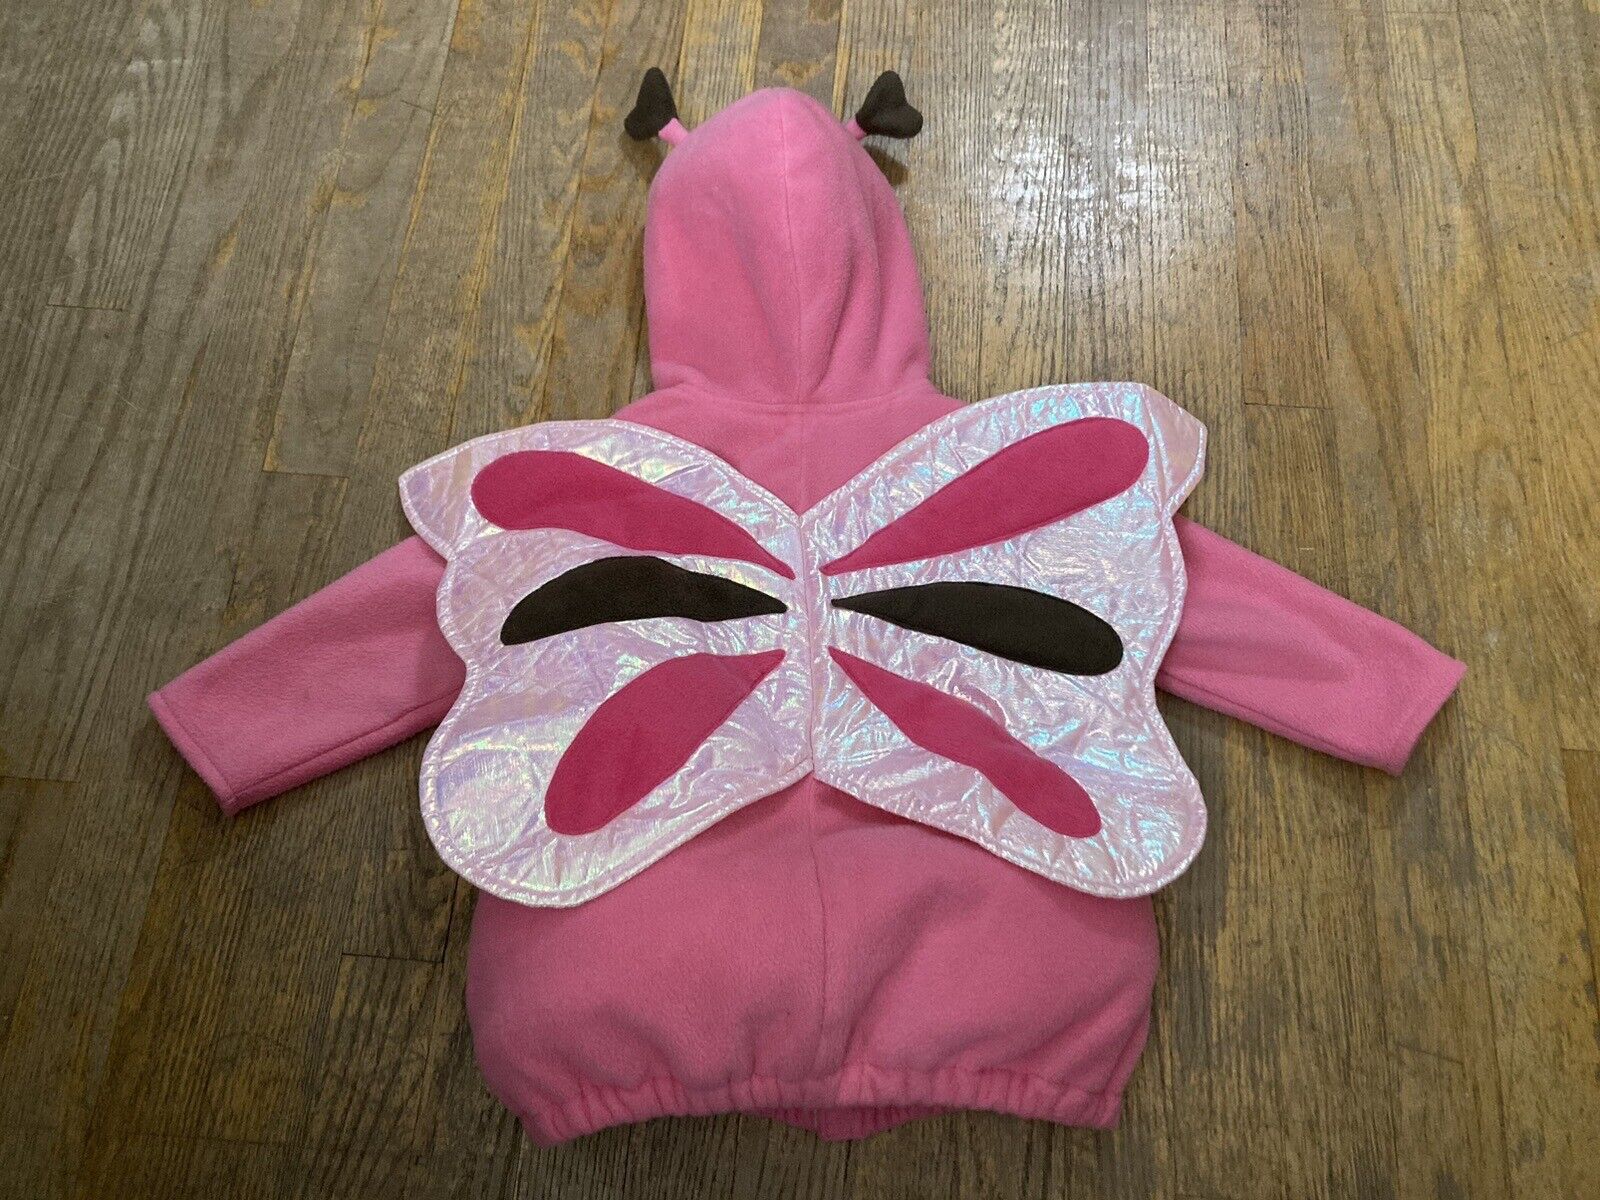 EUC Toddler OLD NAVY HALLOWEEN COSTUME BUTTERFLY sz 2T/3T Pink